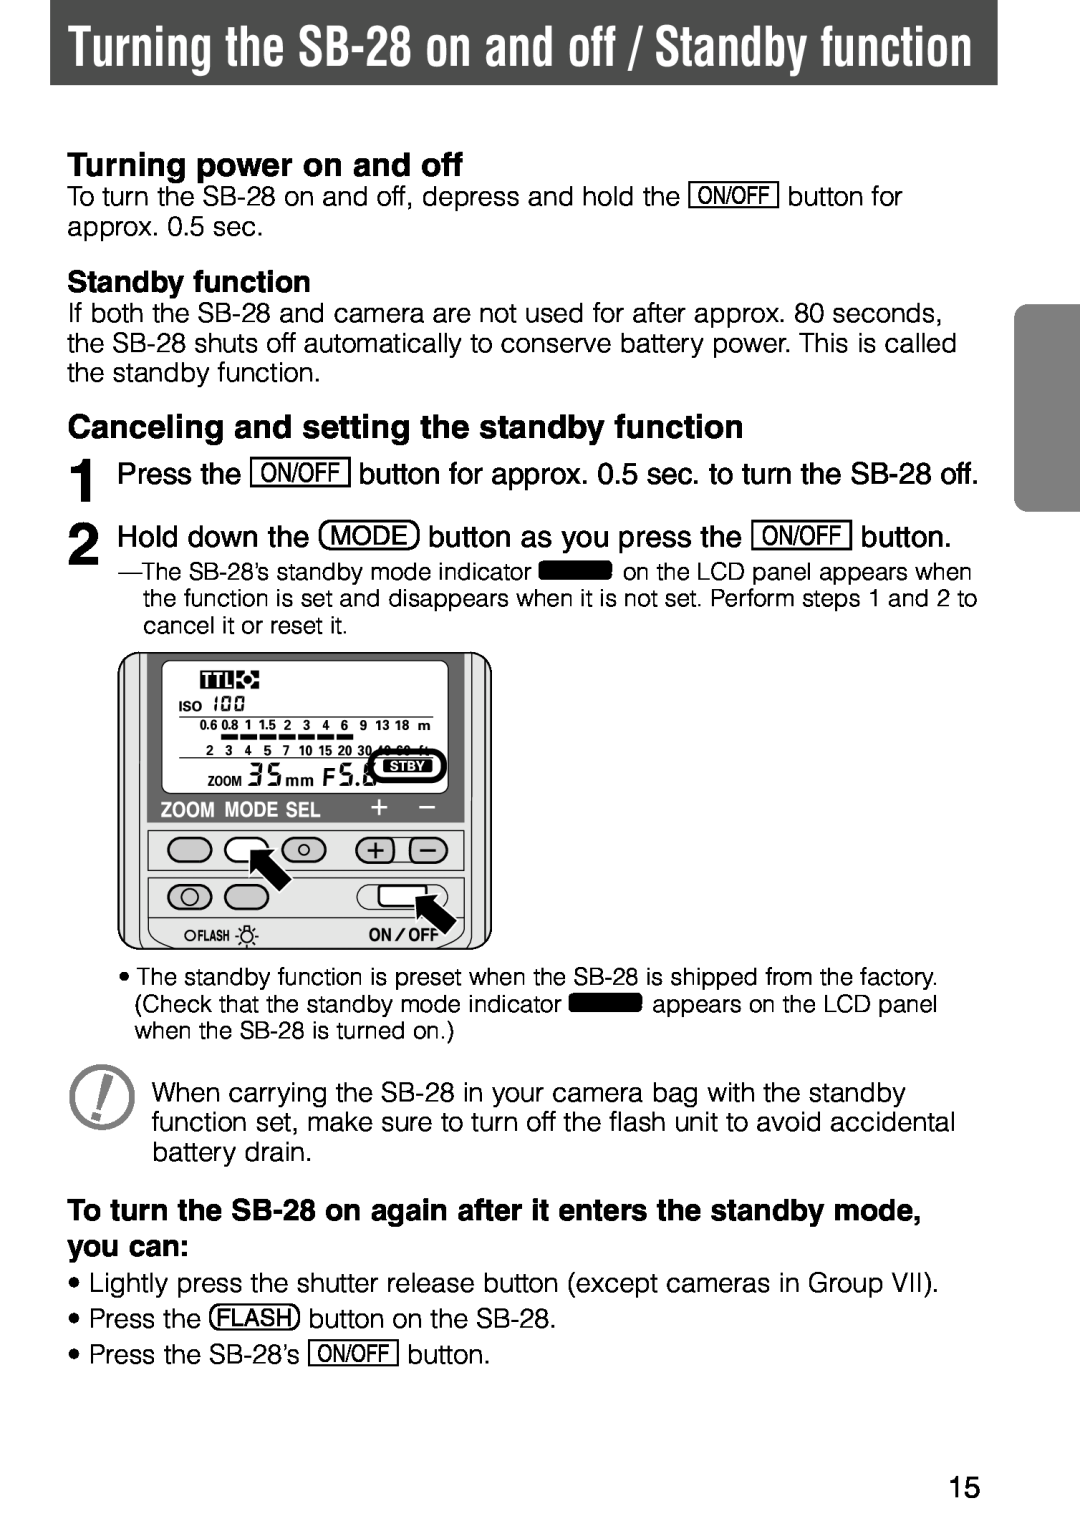 Nikon instruction manual Turning the SB-28on and off / Standby function, Turning power on and off 